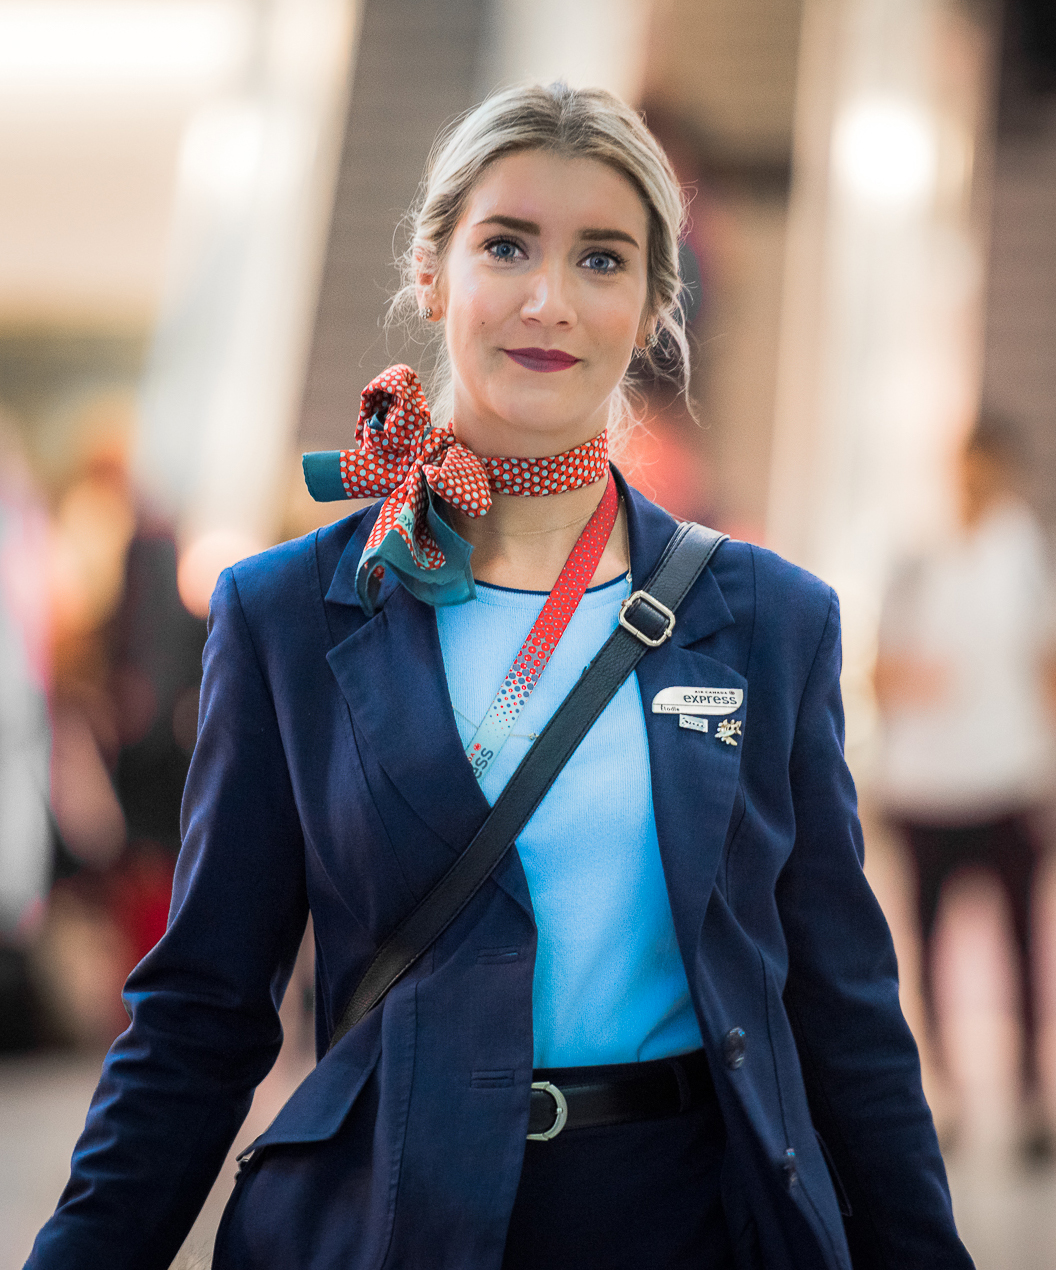 Flight Attendants Wallpapers High Quality | Download Free